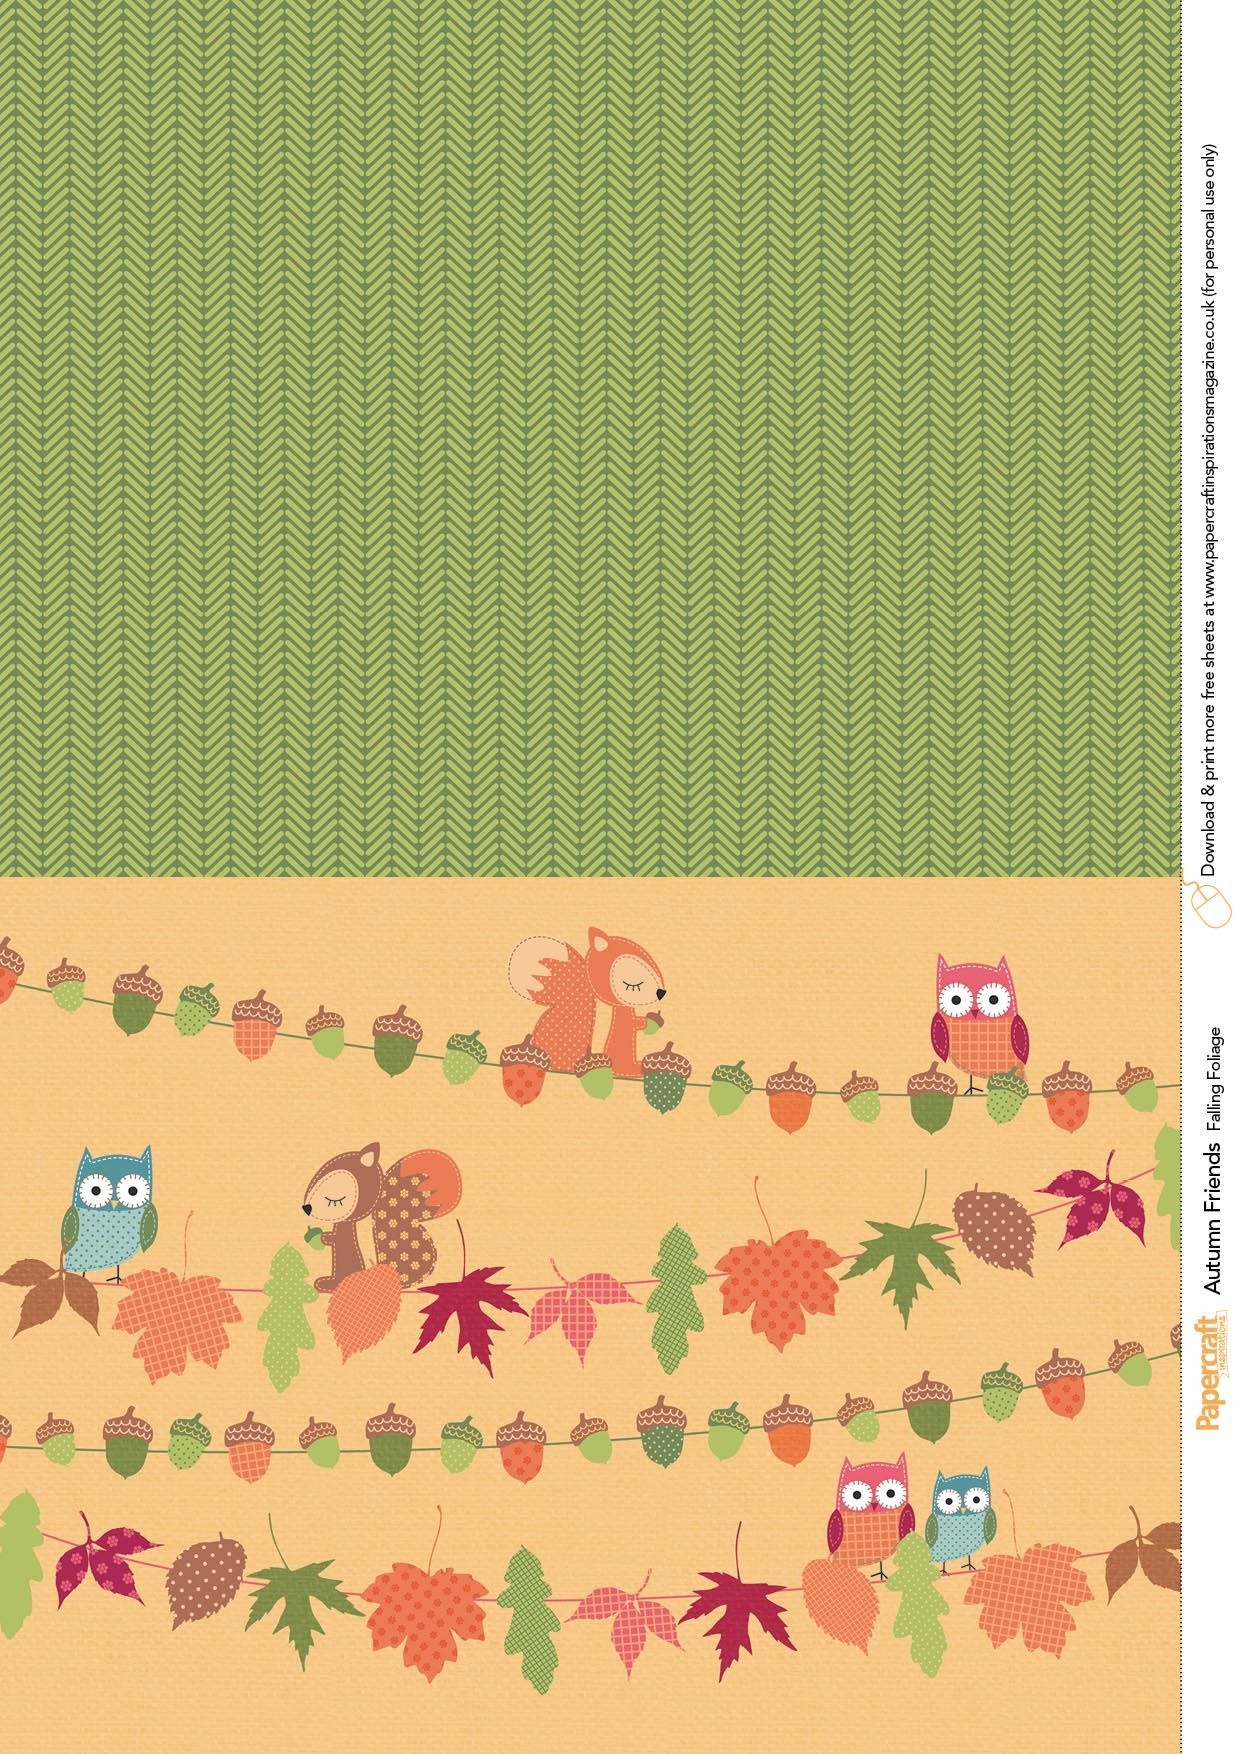 autumn-friends-free-printables-from-papercraft-inspirations-issue